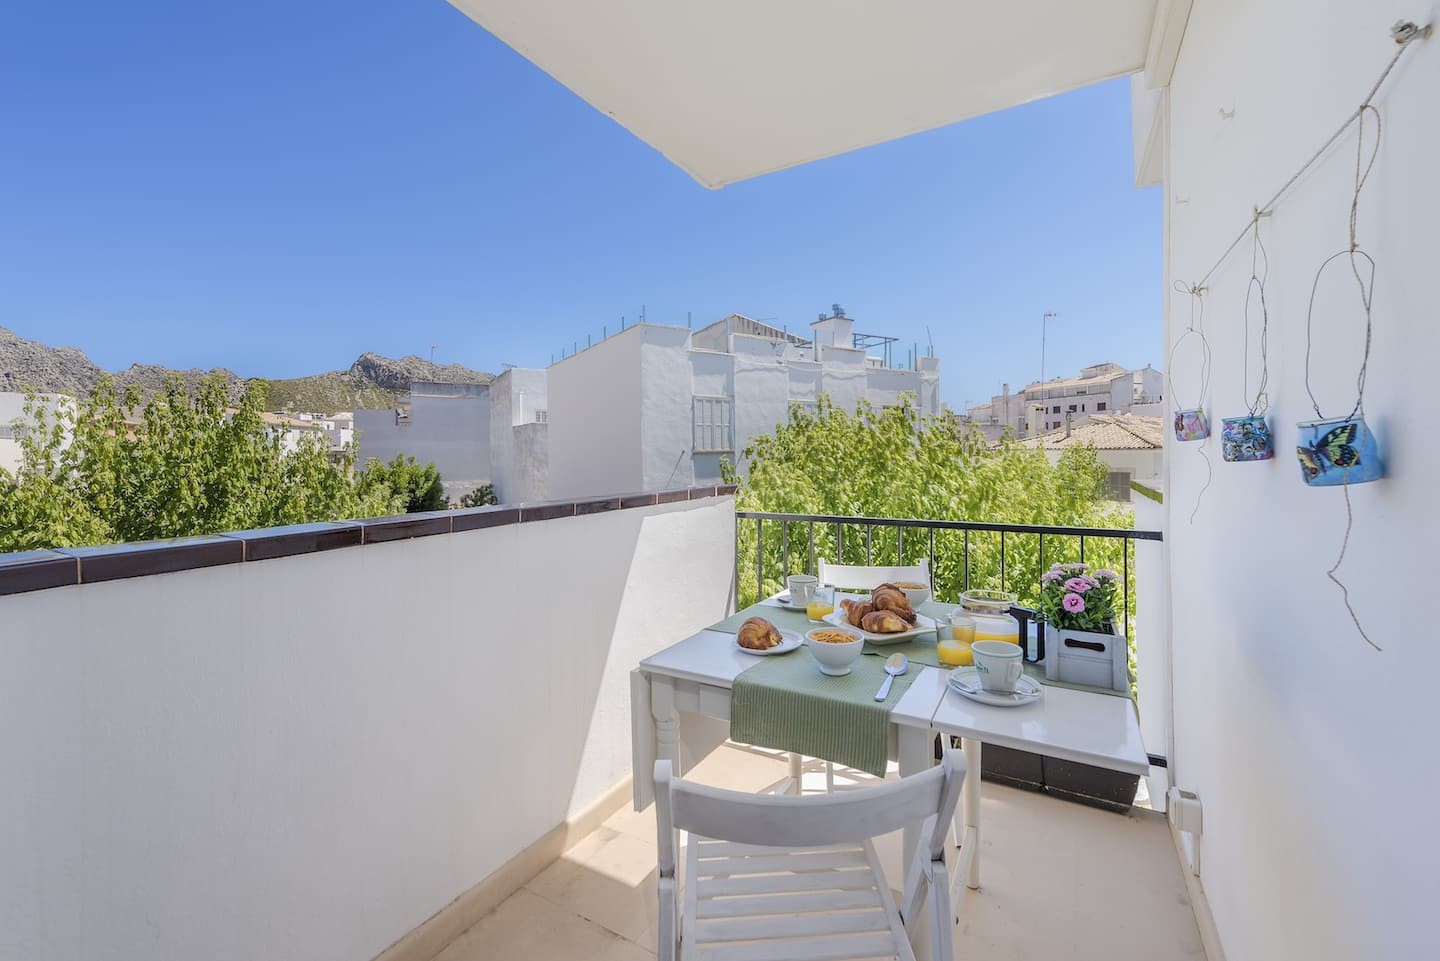 APARTMENT GOLA WALKING DISTANCE TO THE BEACH. Ref. 31-